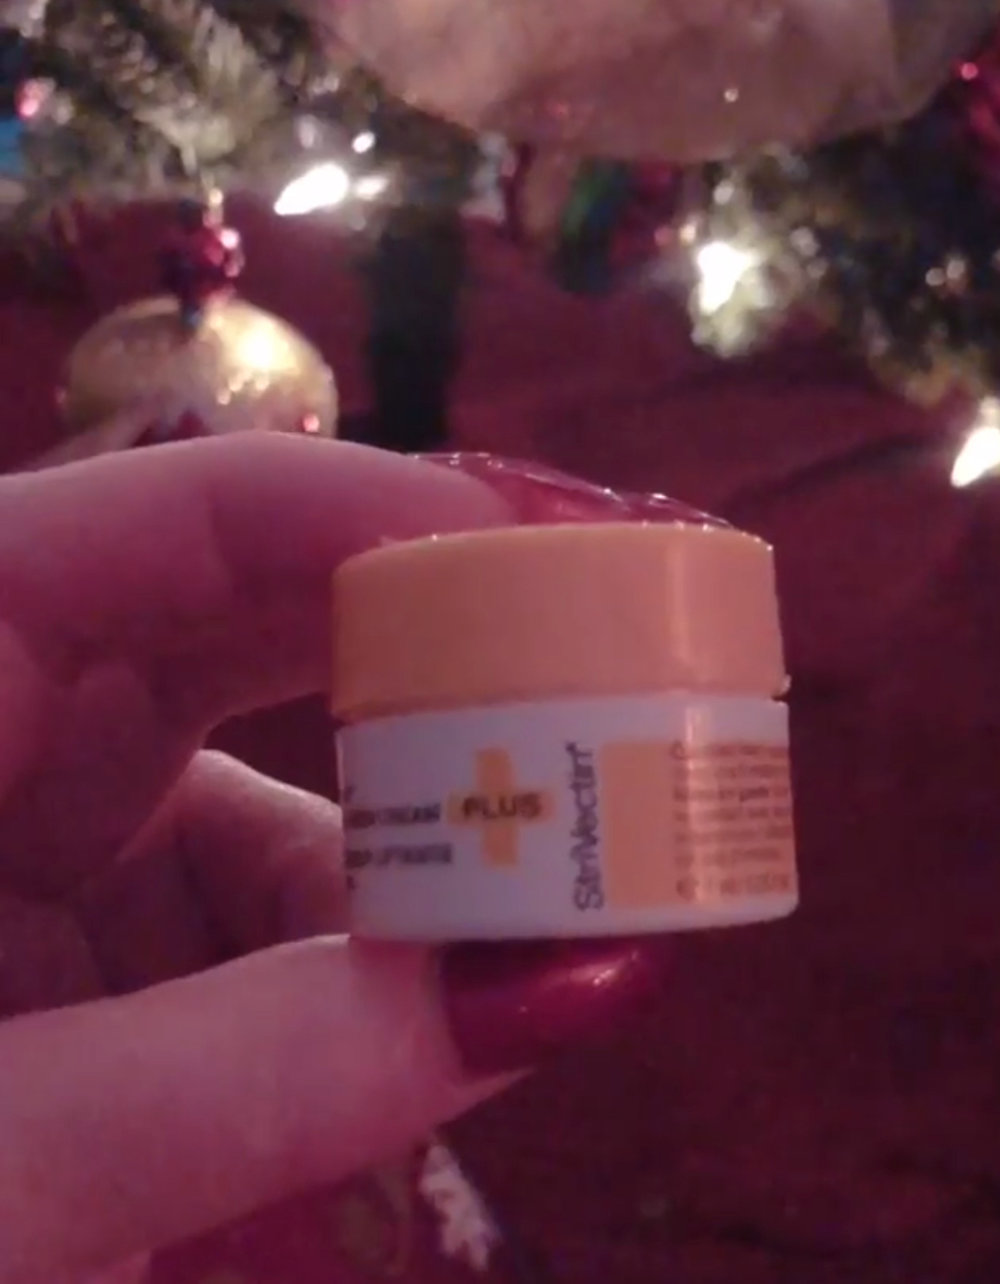 December 1st:  NIA 214 Technology TL Advanced Tightening Neck Cream by Strivectin